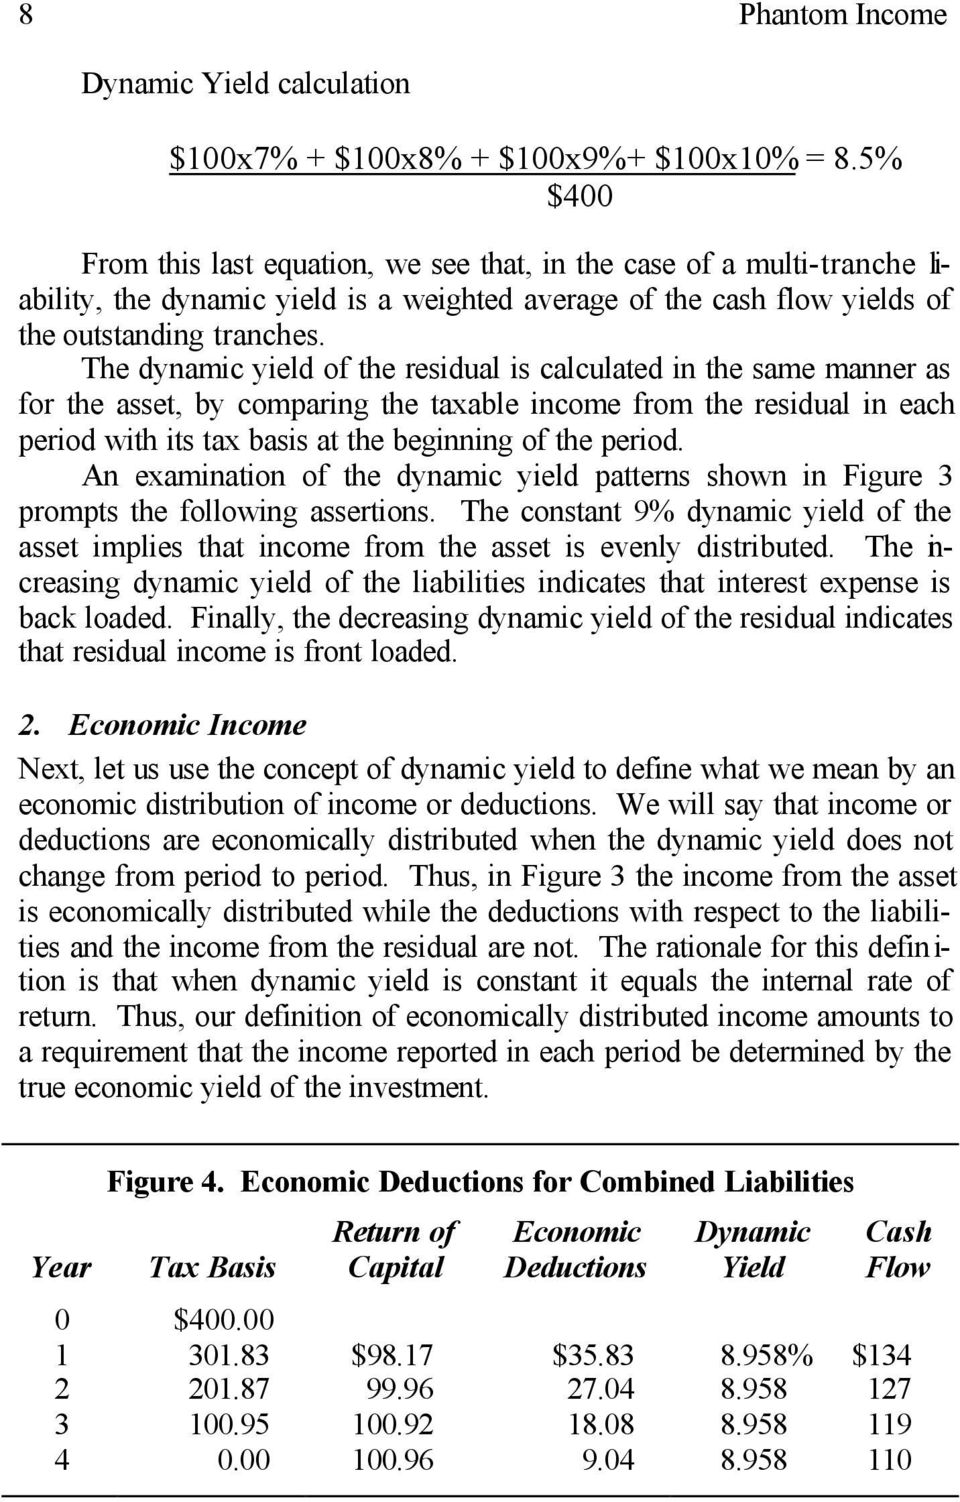 The dynamic yield of the residual is calculated in the same manner as for the asset, by comparing the taxable income from the residual in each period with its tax basis at the beginning of the period.